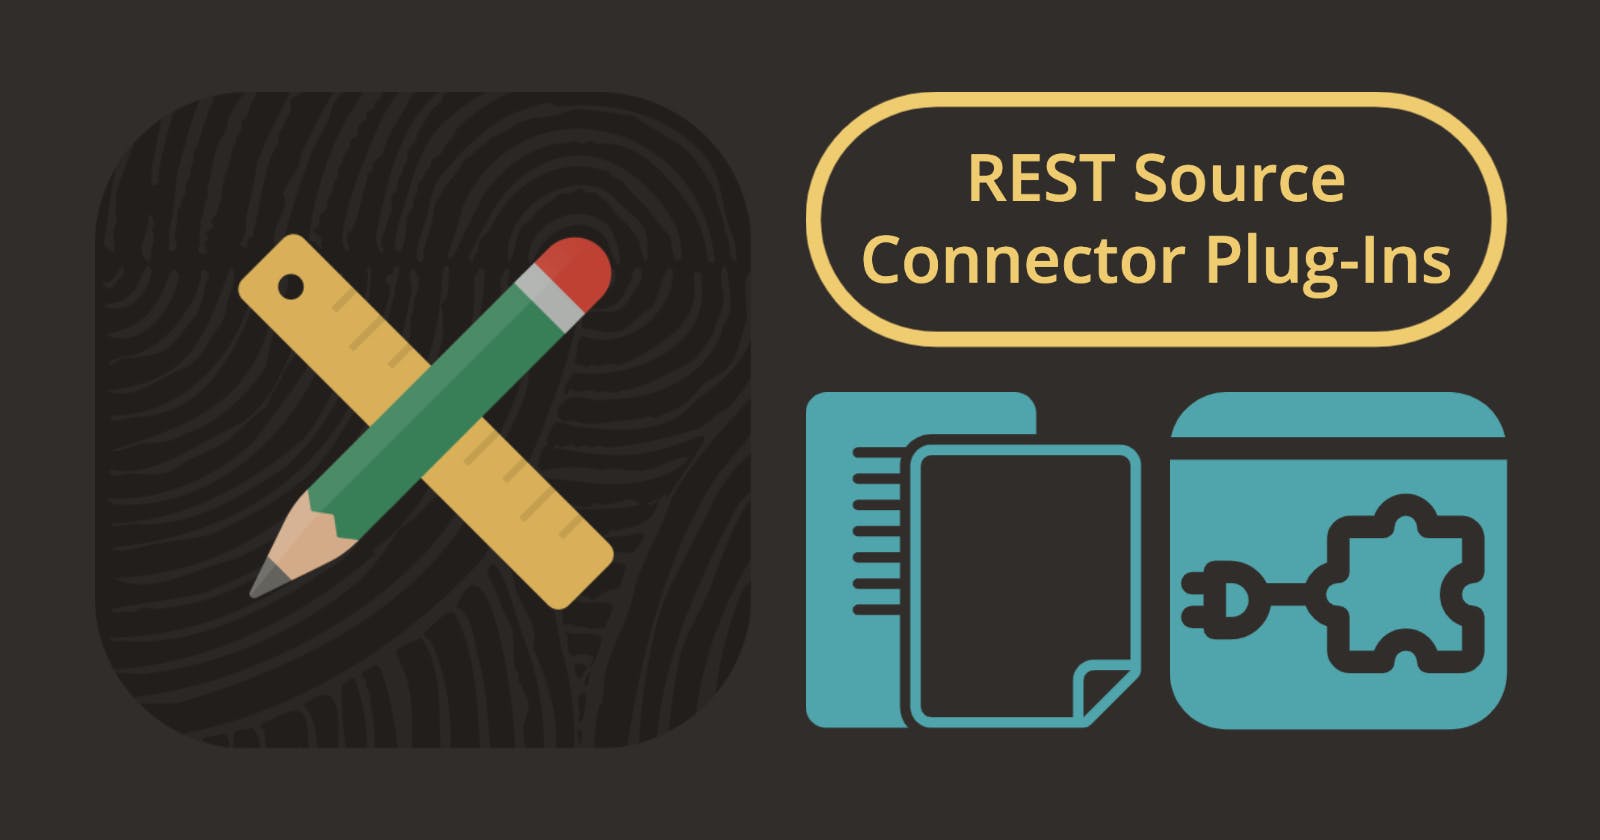 Master APEX REST Source Pagination with REST Source Connector Plug-Ins